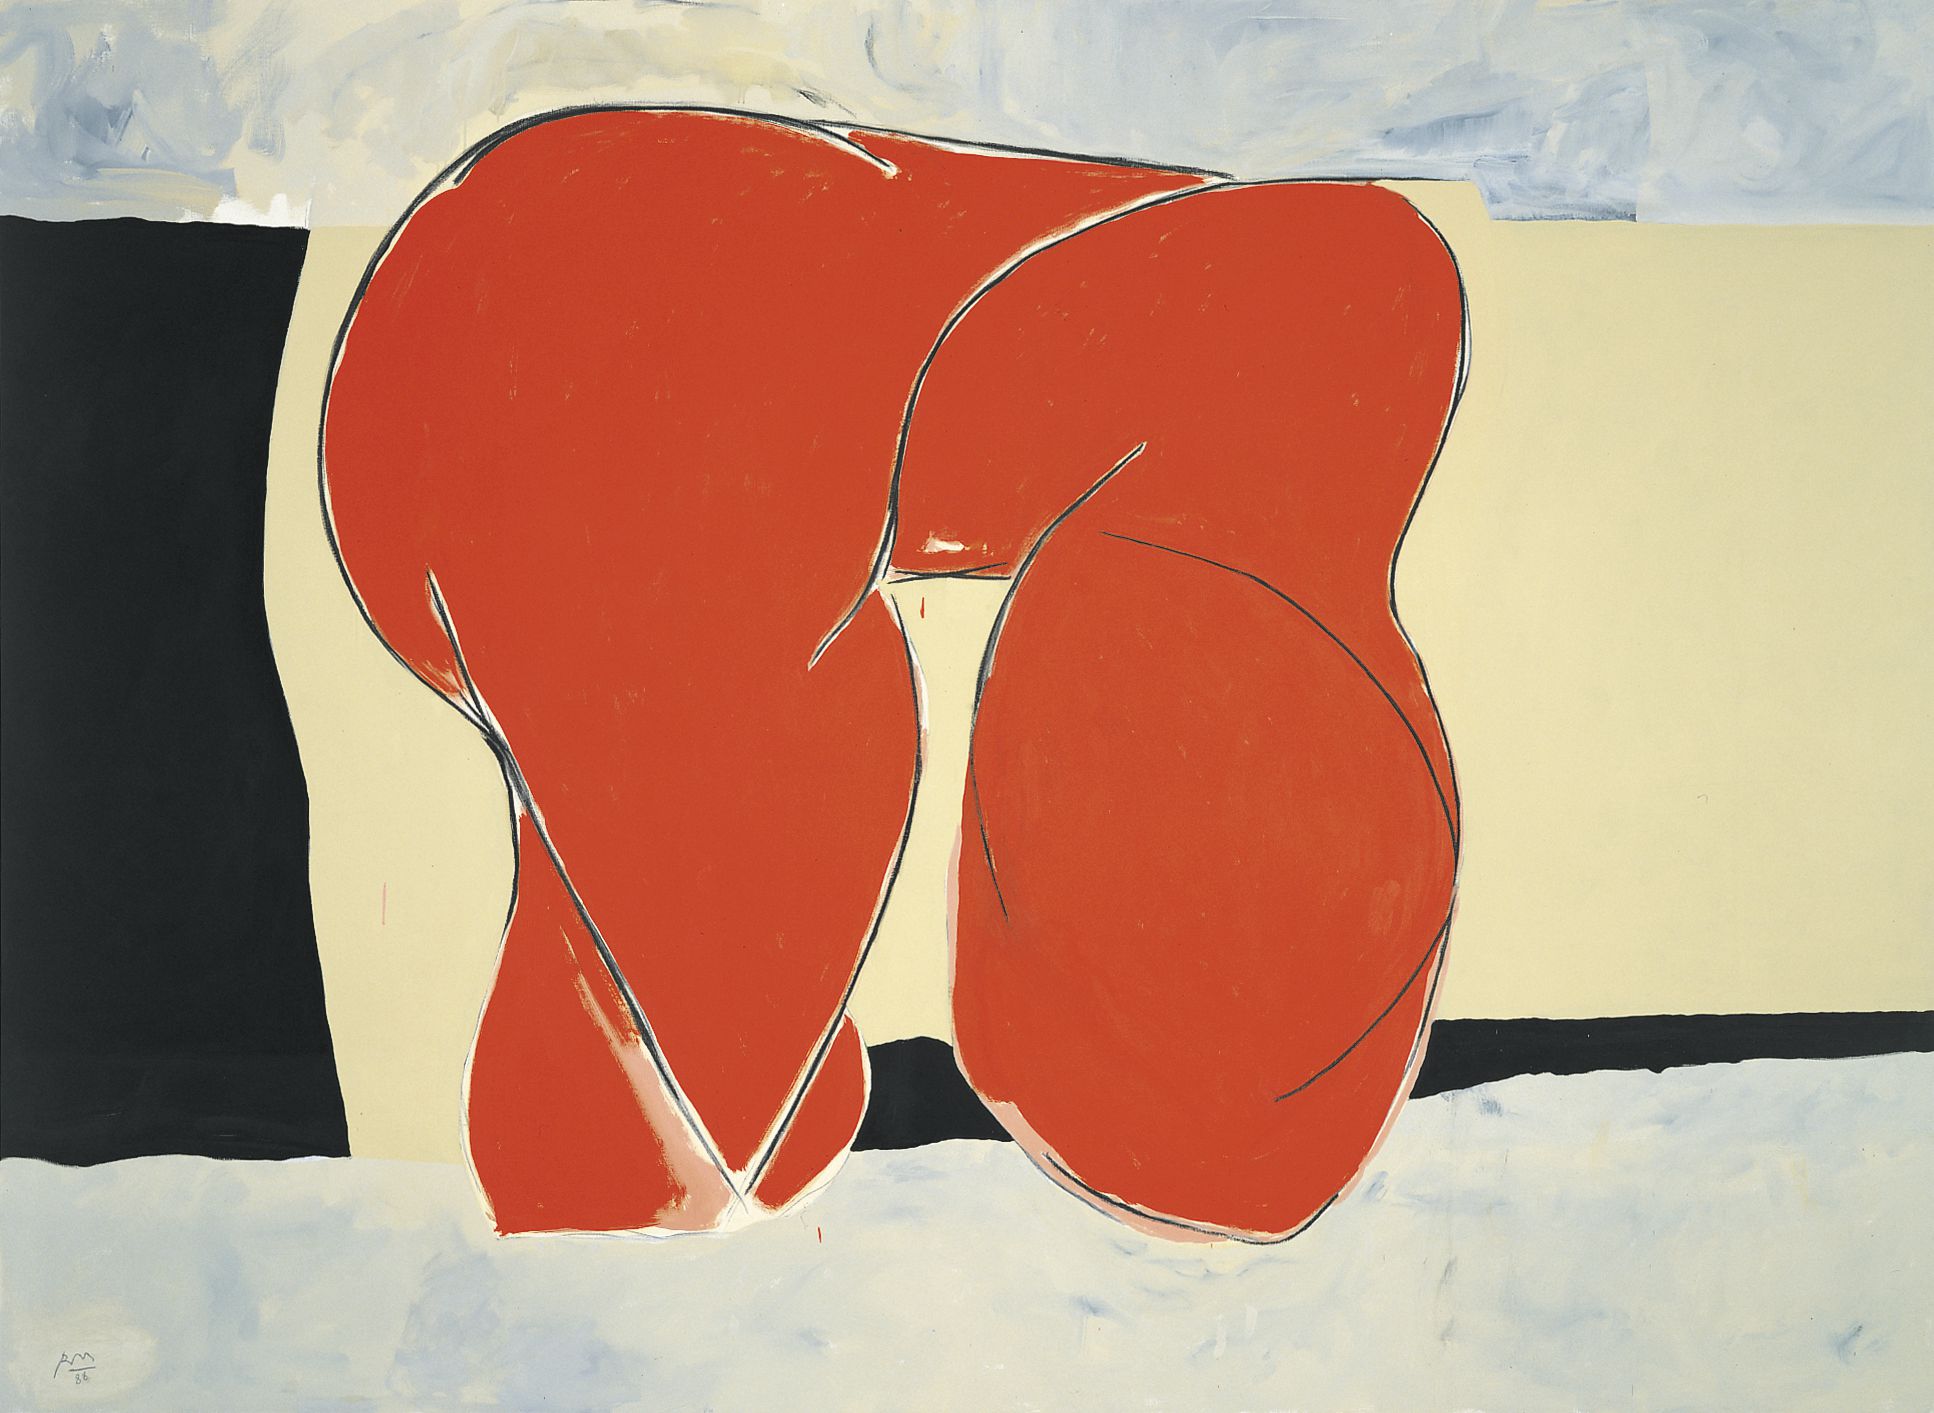 The Feminine II, 1988. Acrylic and charcoal on canvas, 88 x 120 inches (222.5 x 304.8 cm)